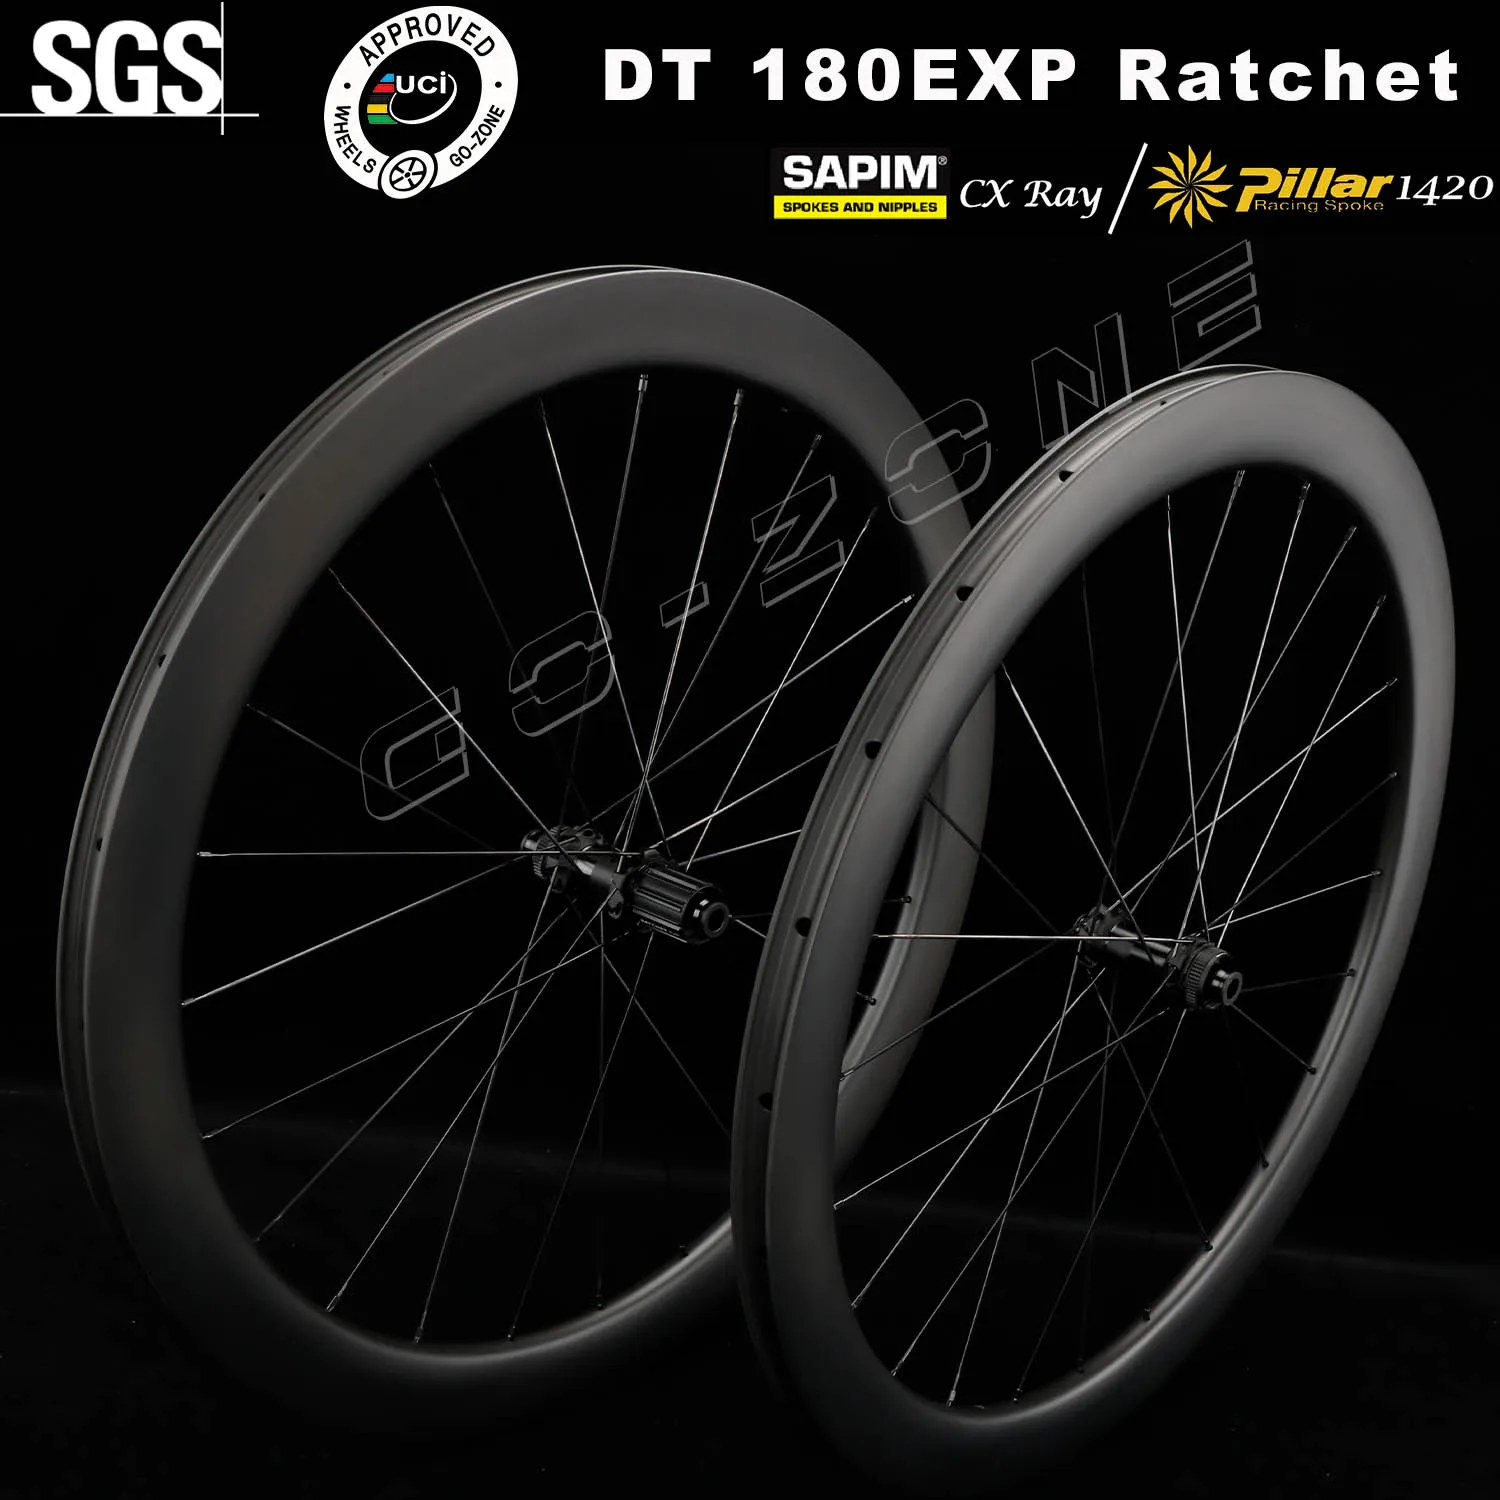 

700c Road Carbon Wheels Disc Brake DT 180 Ratchet Sapim CX Ray / Pillar 1420 Center Lock UCI Approved Road Bicycle Wheelset